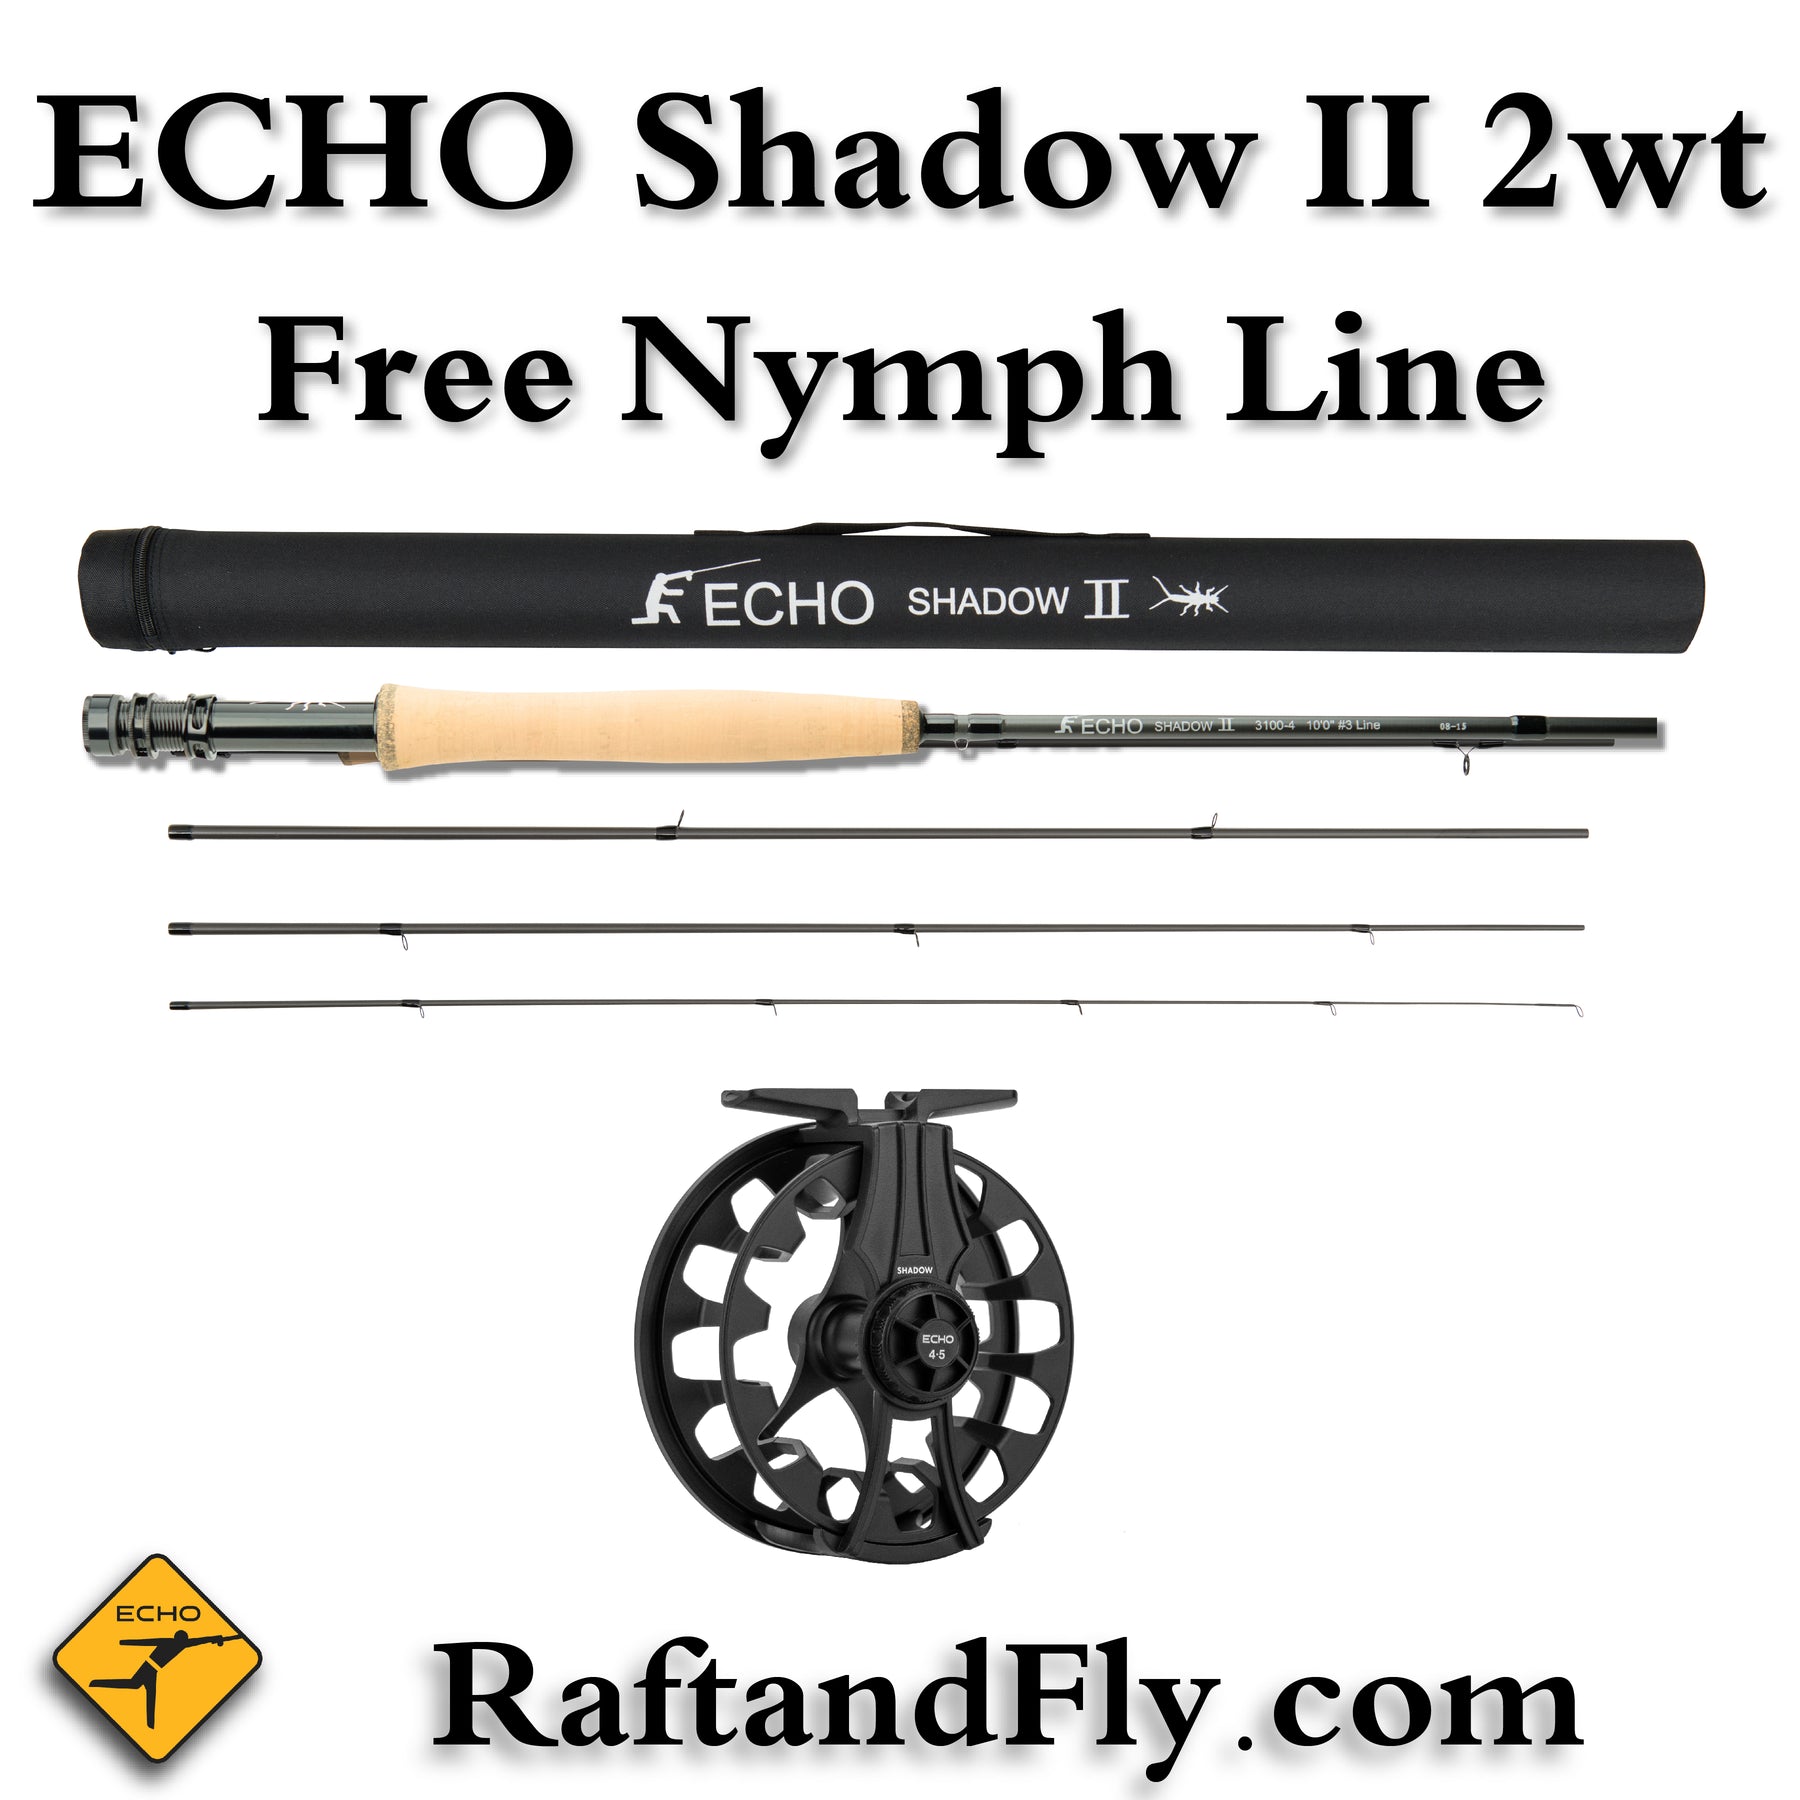 Echo Shadow II 3wt 10'0 - 11'0 with Free Competition Kit - Add Line –  Raft & Fly Shop